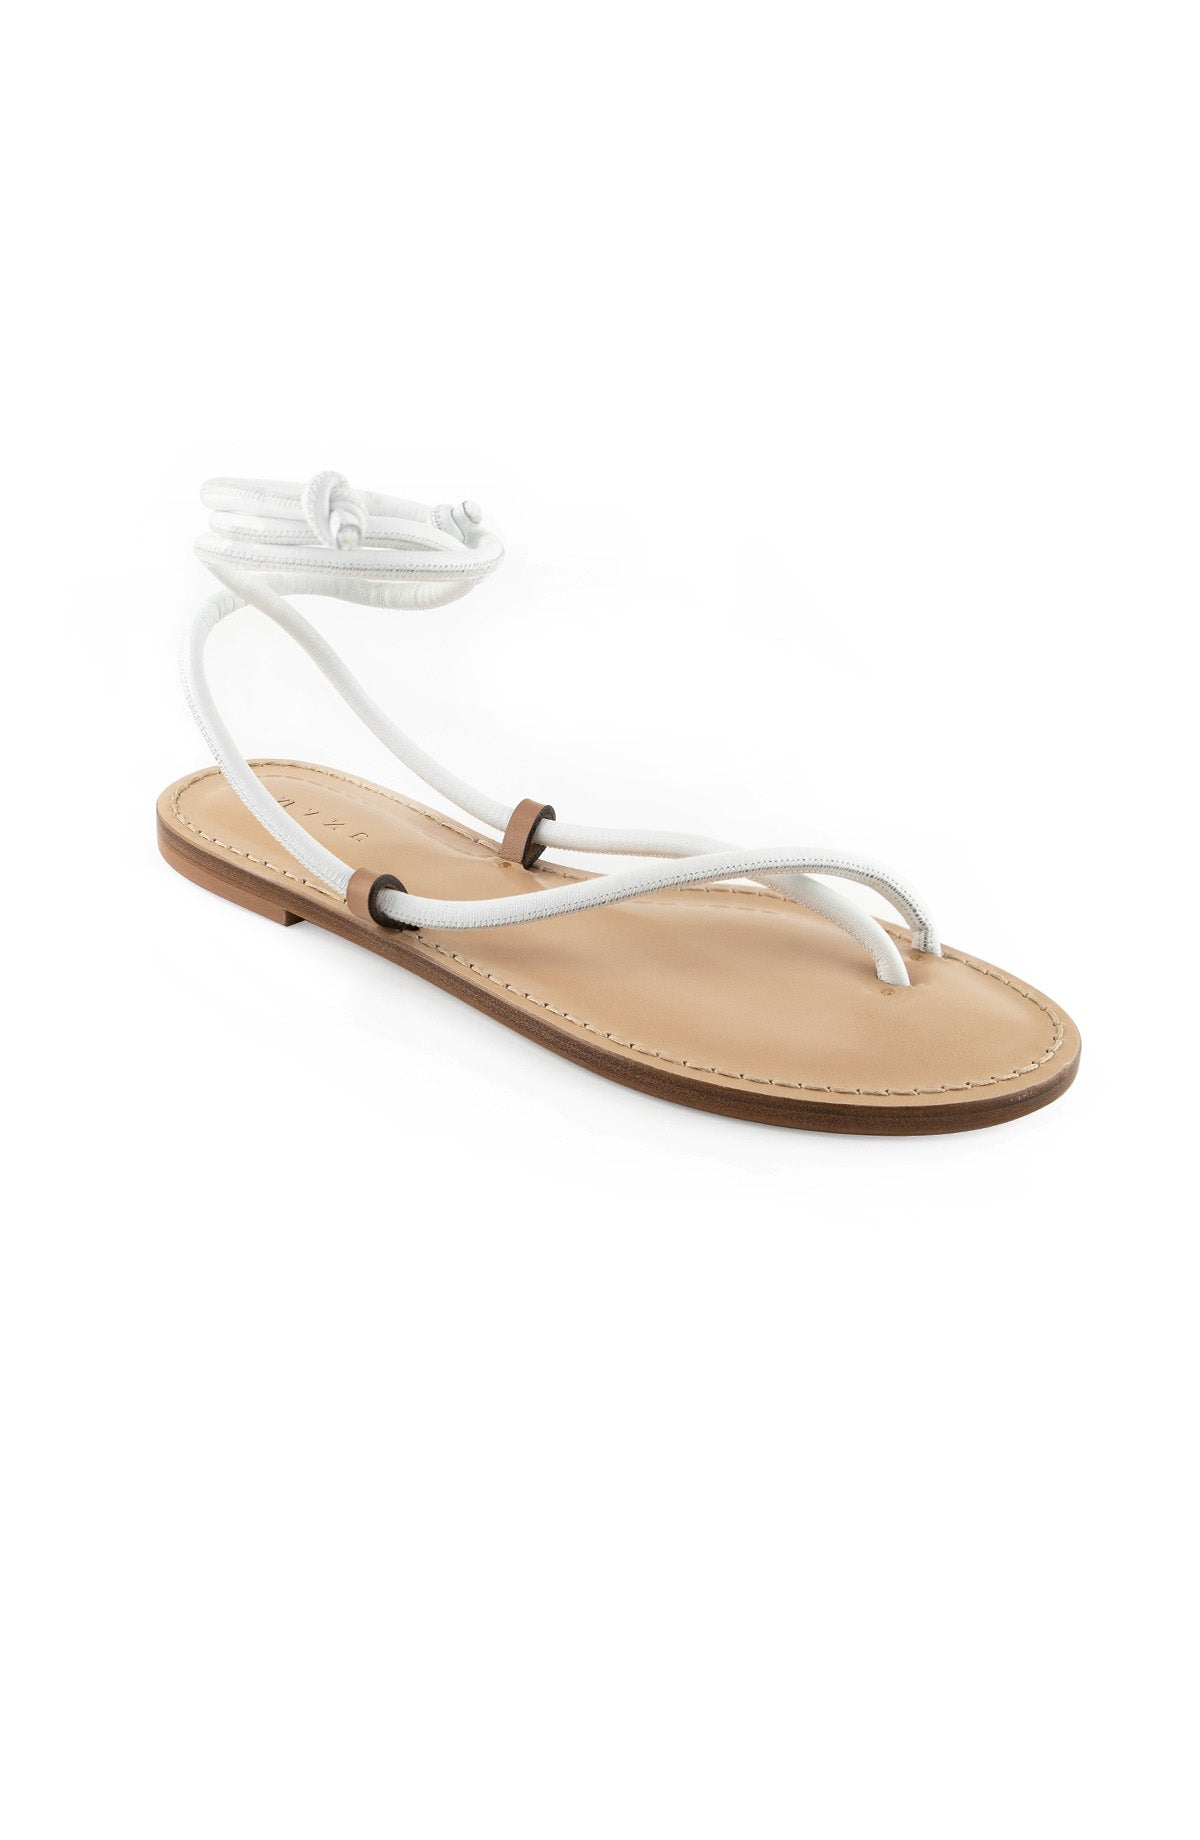 Style 18 | The Kilimanjaro | White Leather Cord | Nude Sole